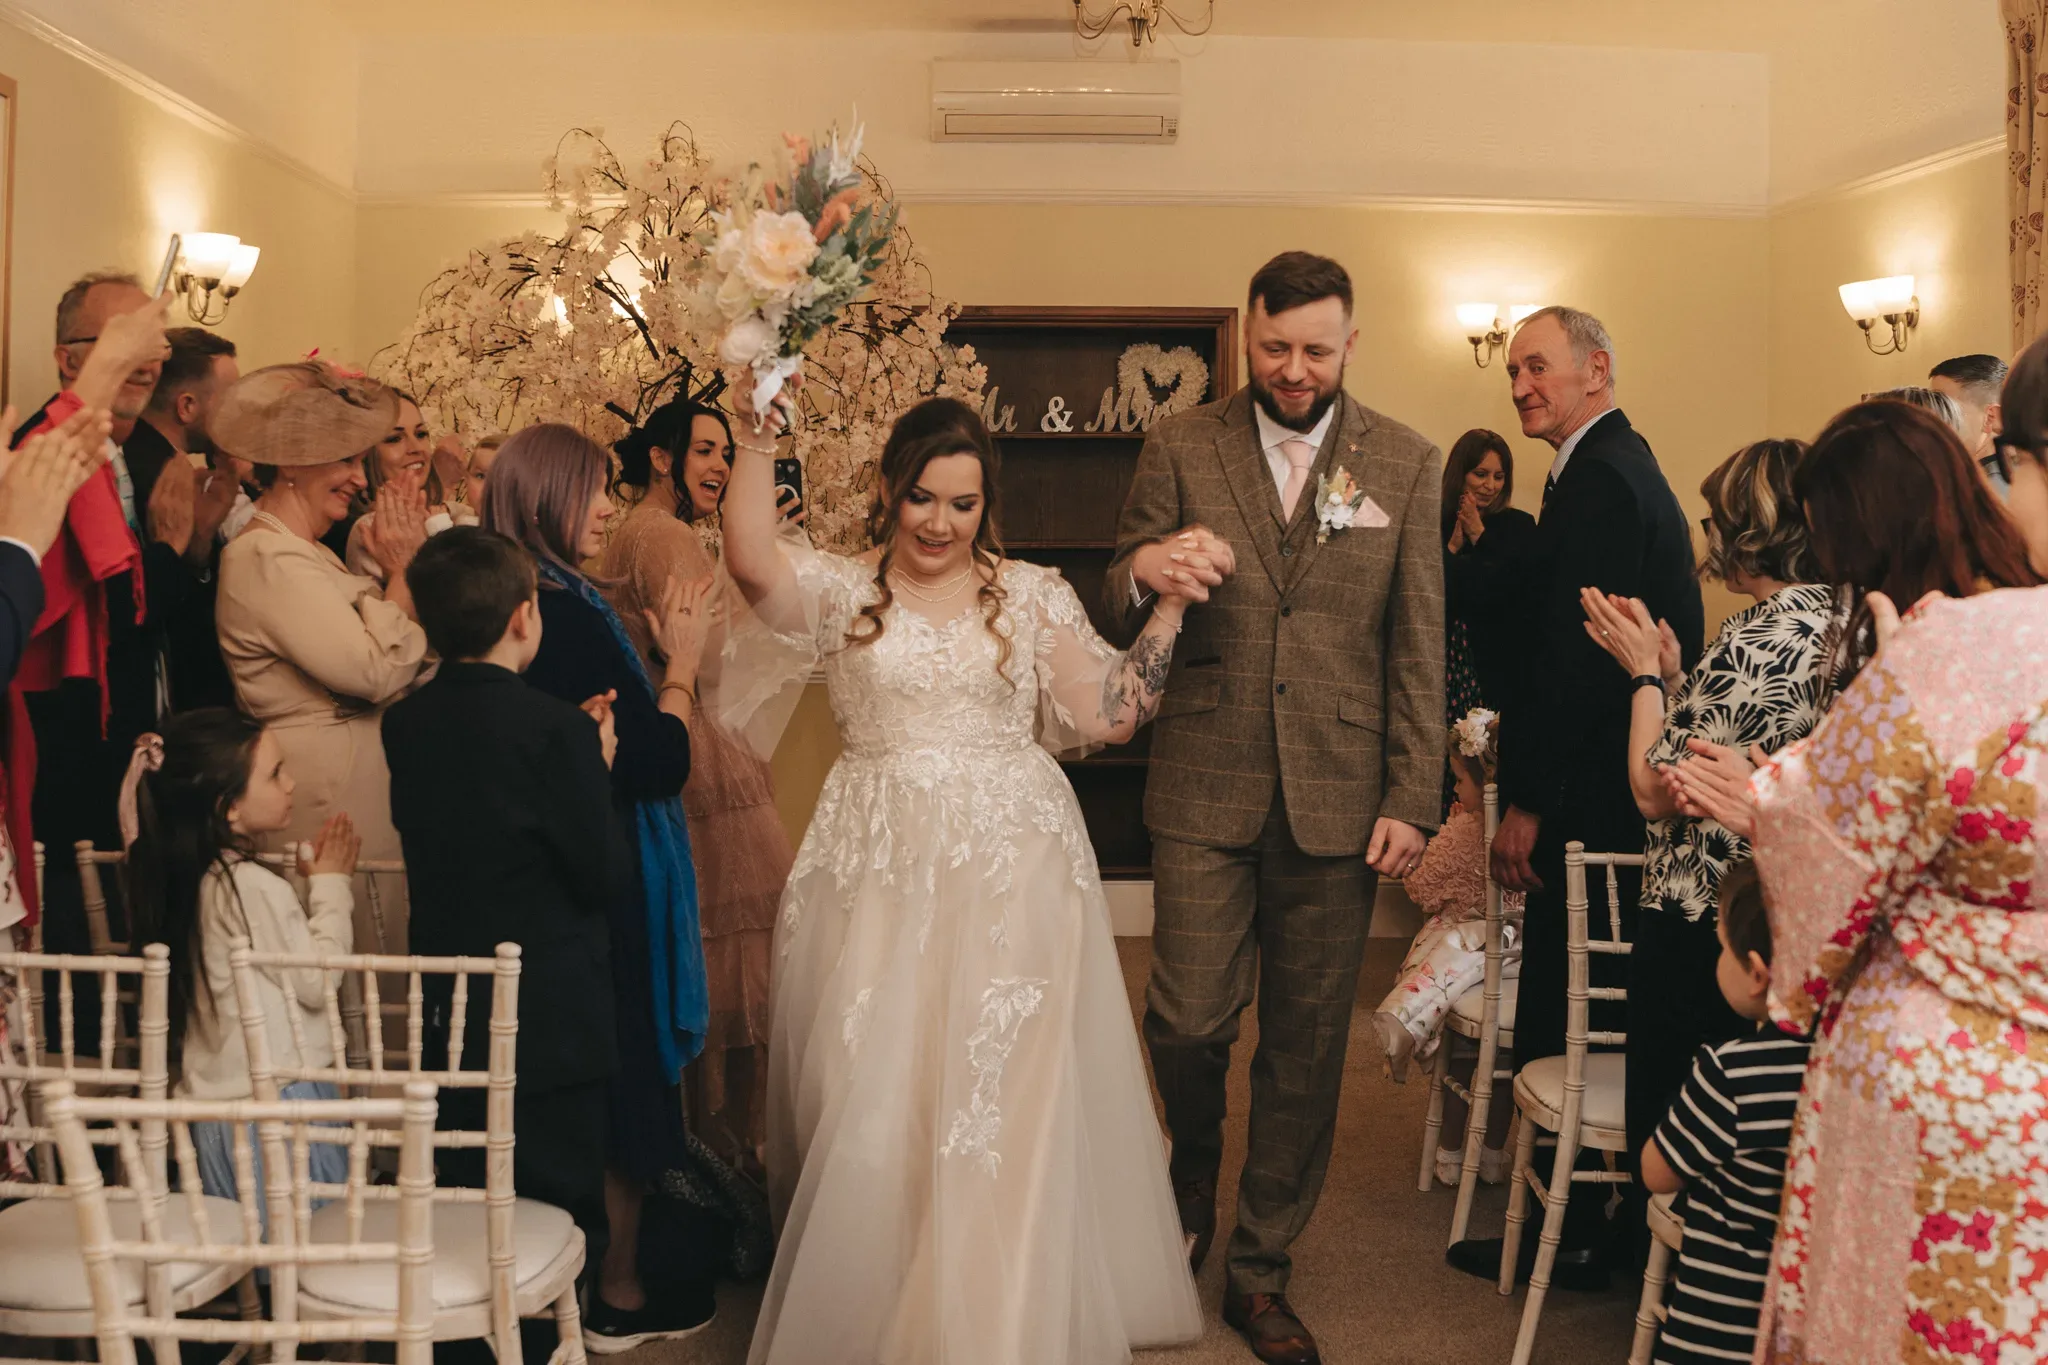 A newlywed couple joyfully exits their wedding ceremony, walking hand-in-hand through a crowd of applauding guests. the bride, in an elegant white dress, and the groom, in a tweed suit, smile broadly.